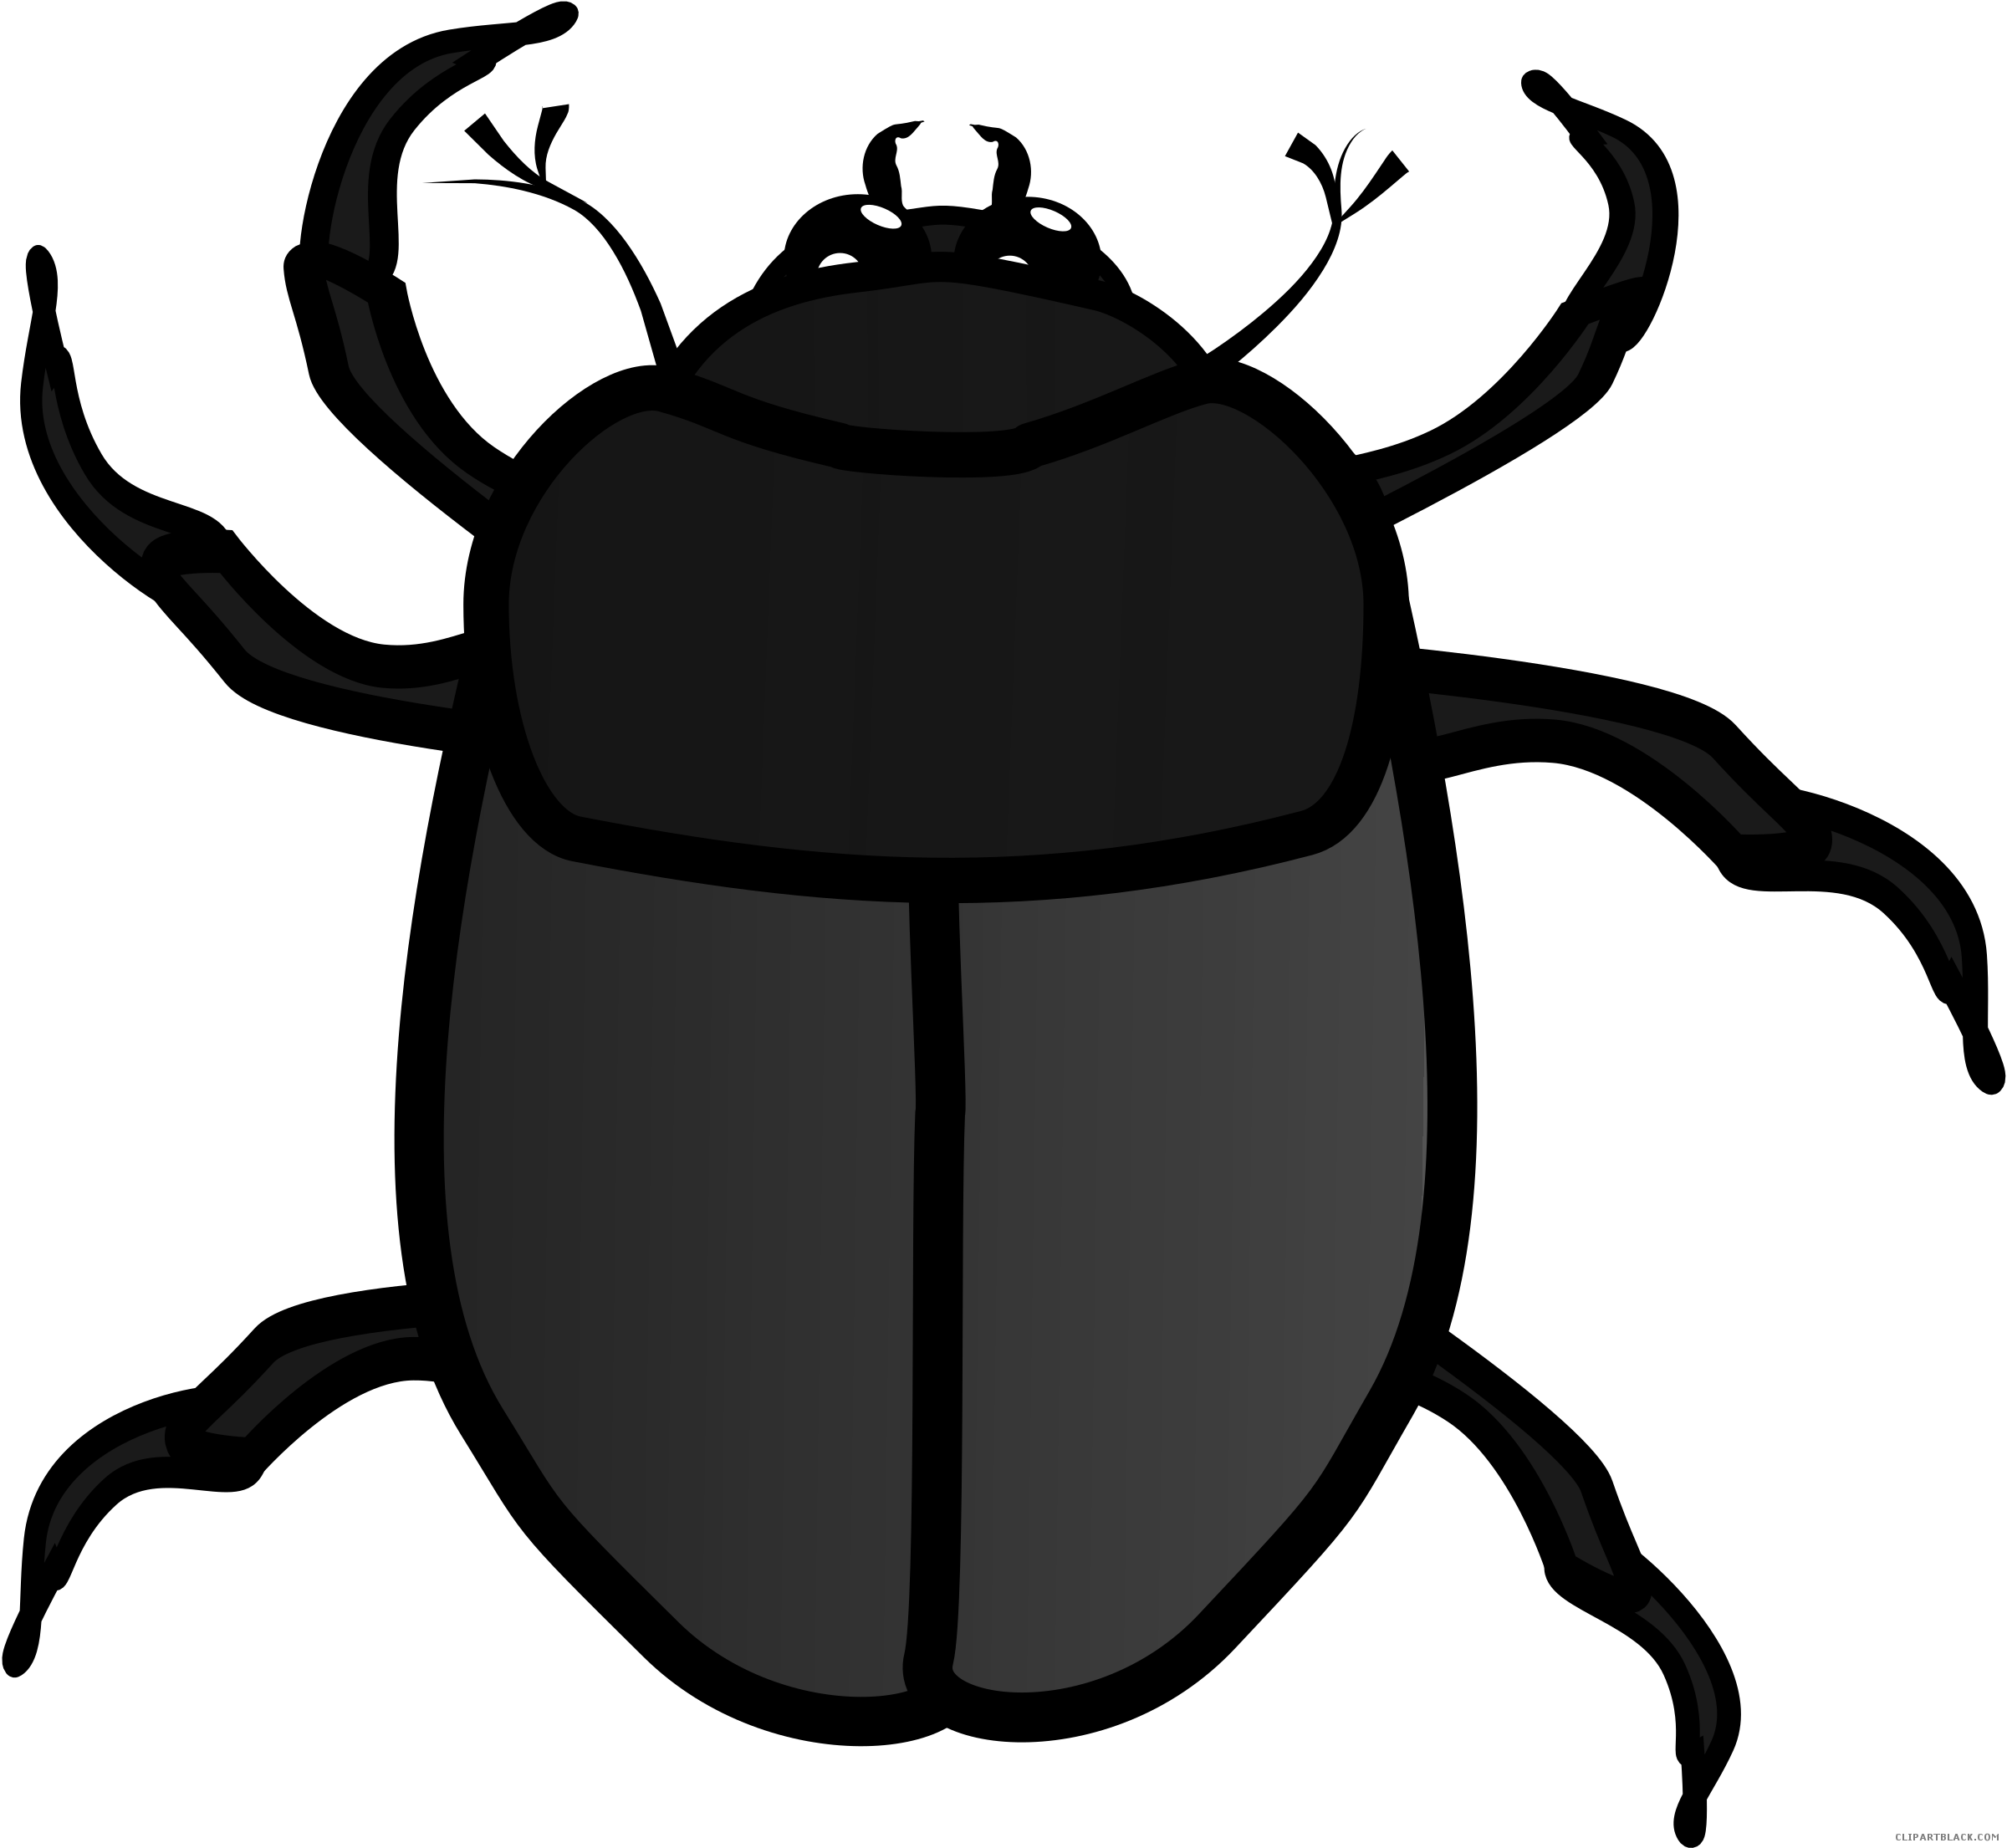 bugs clipart red bug